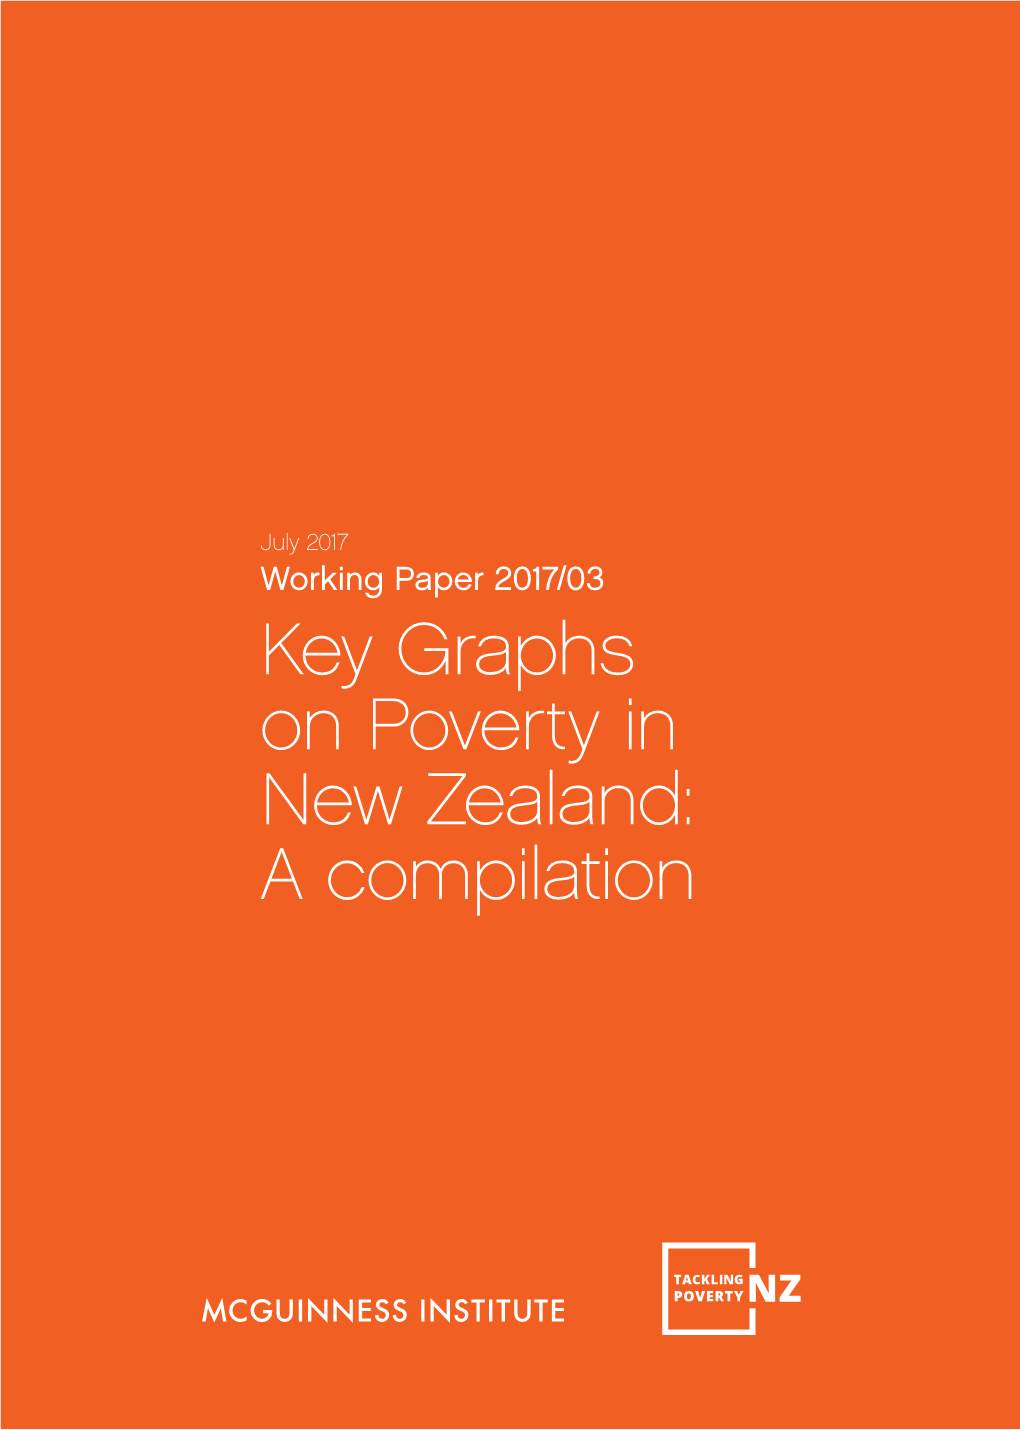 Key Graphs on Poverty in New Zealand: a Compilation